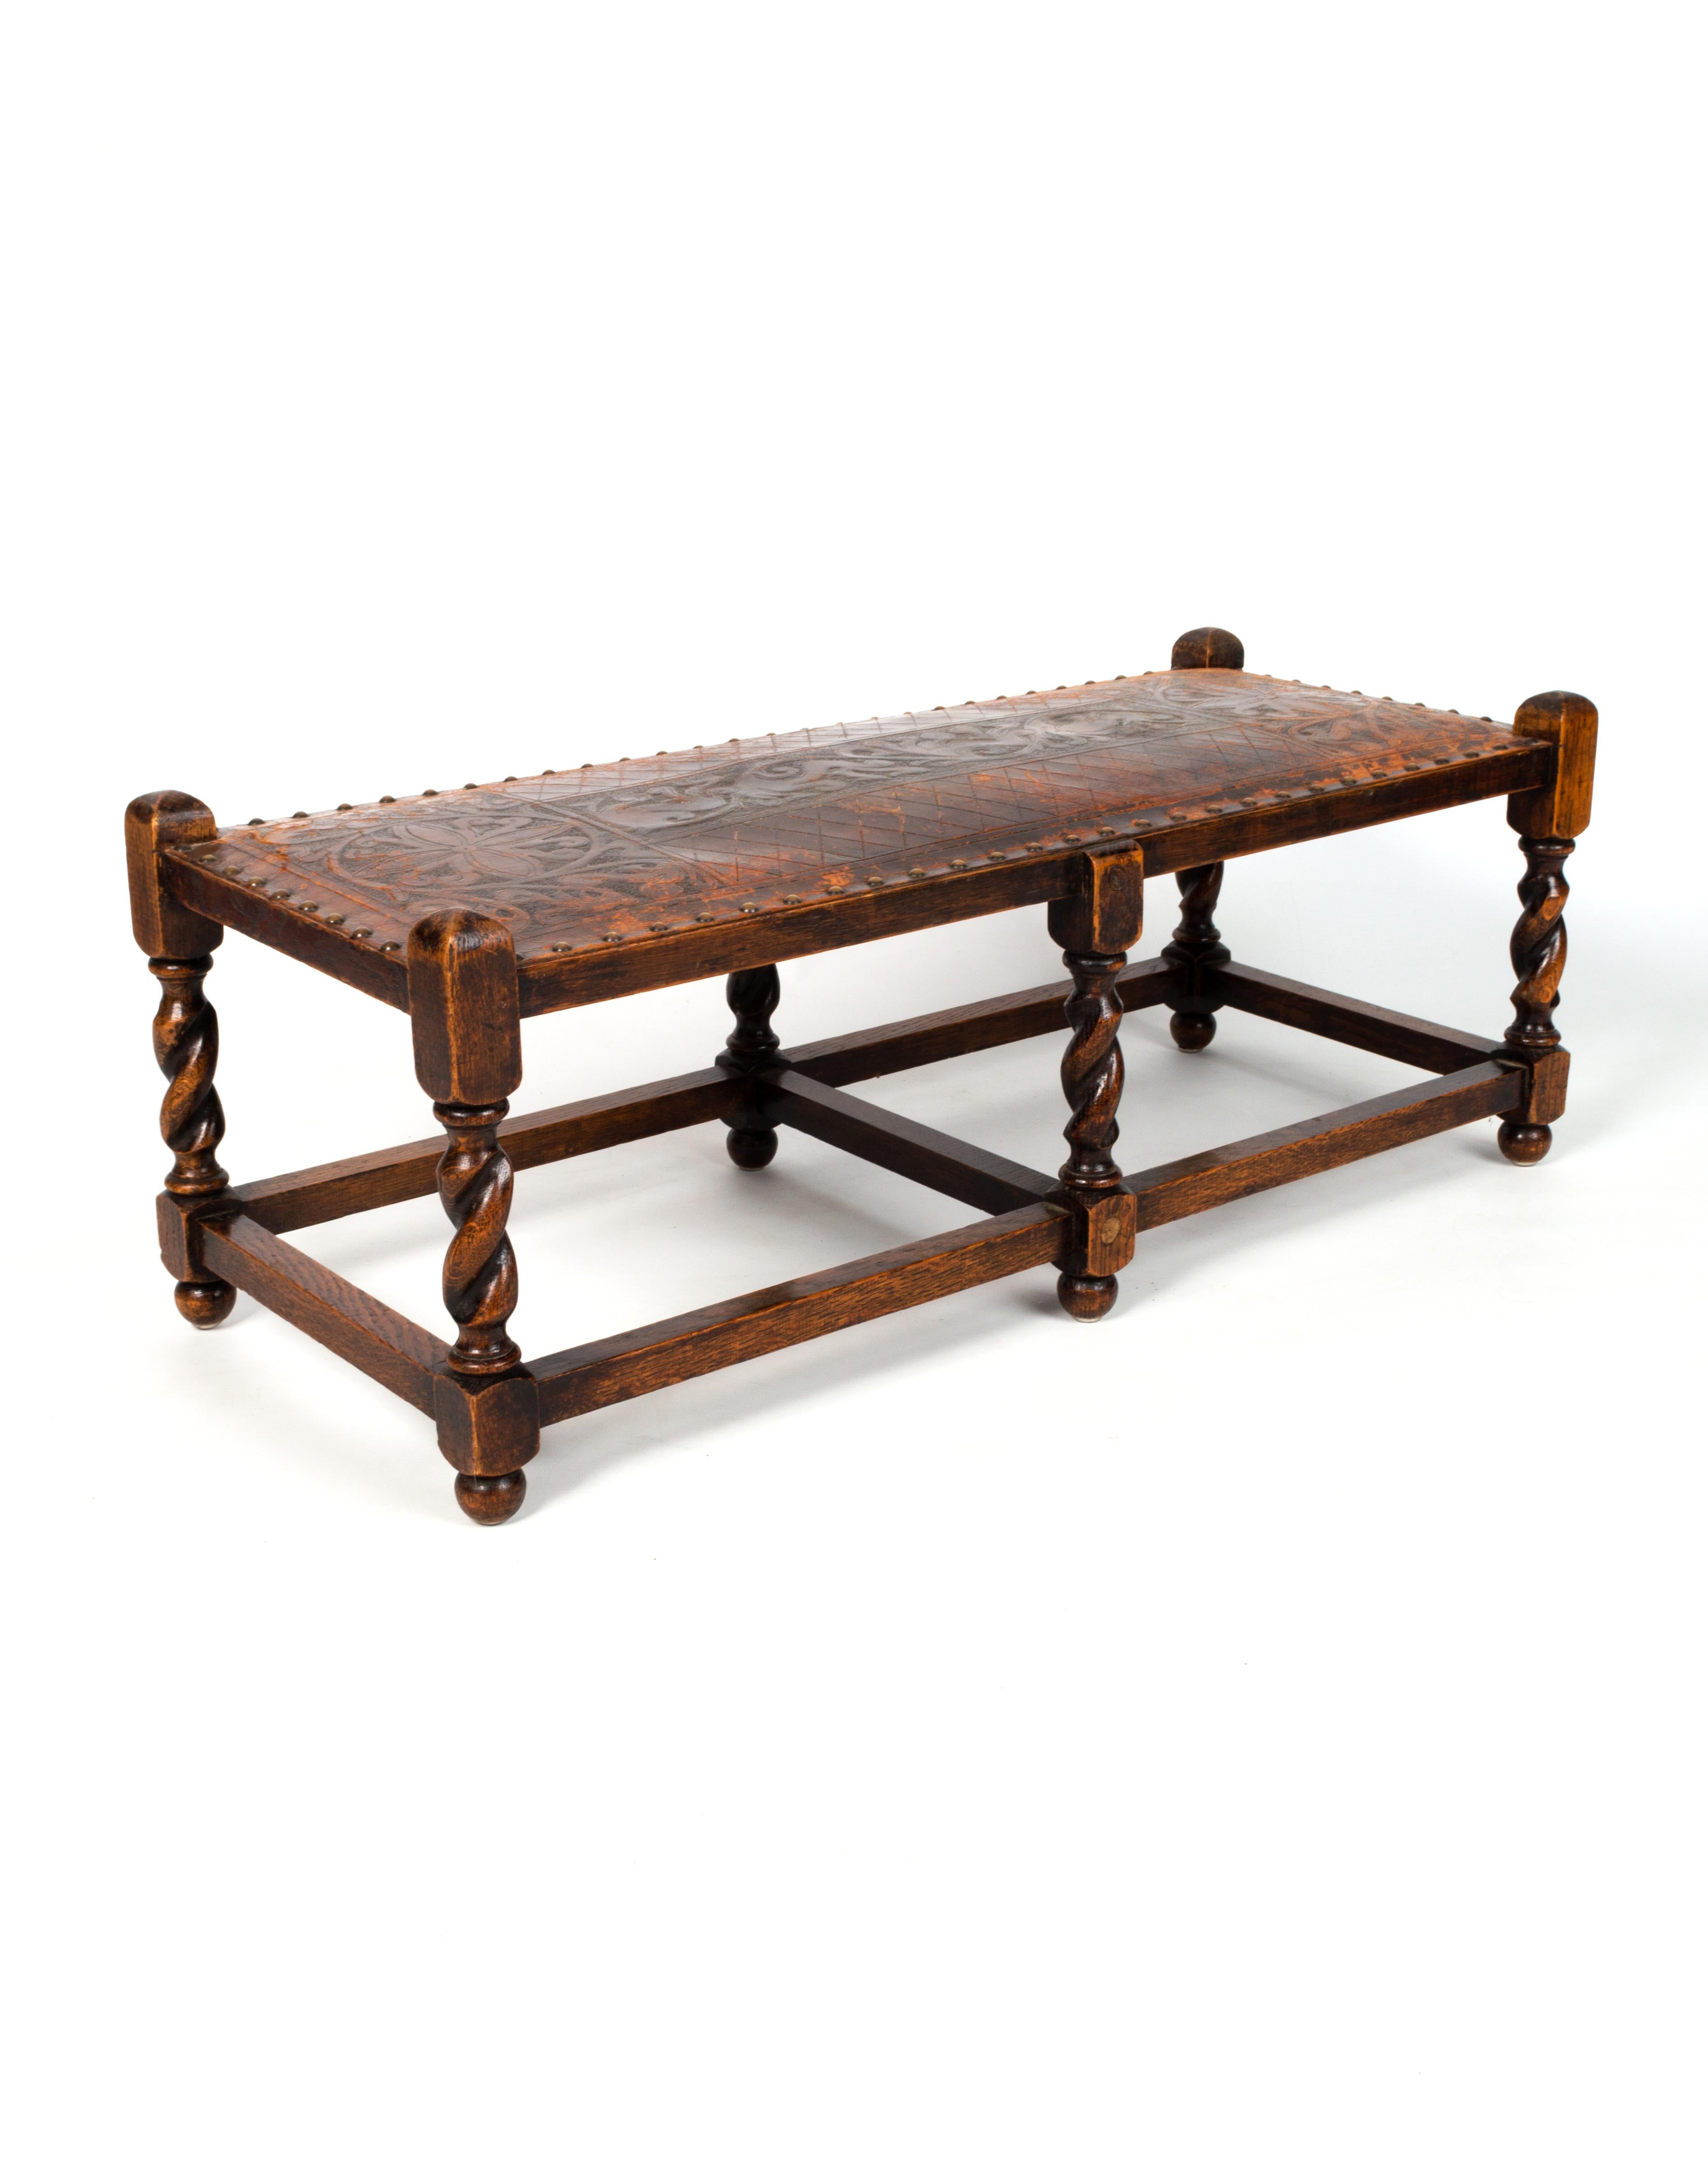 Antique French Oak Barley Twist Bench Stool Ottoman Seat Embossed Leather C.1900 For Sale 1